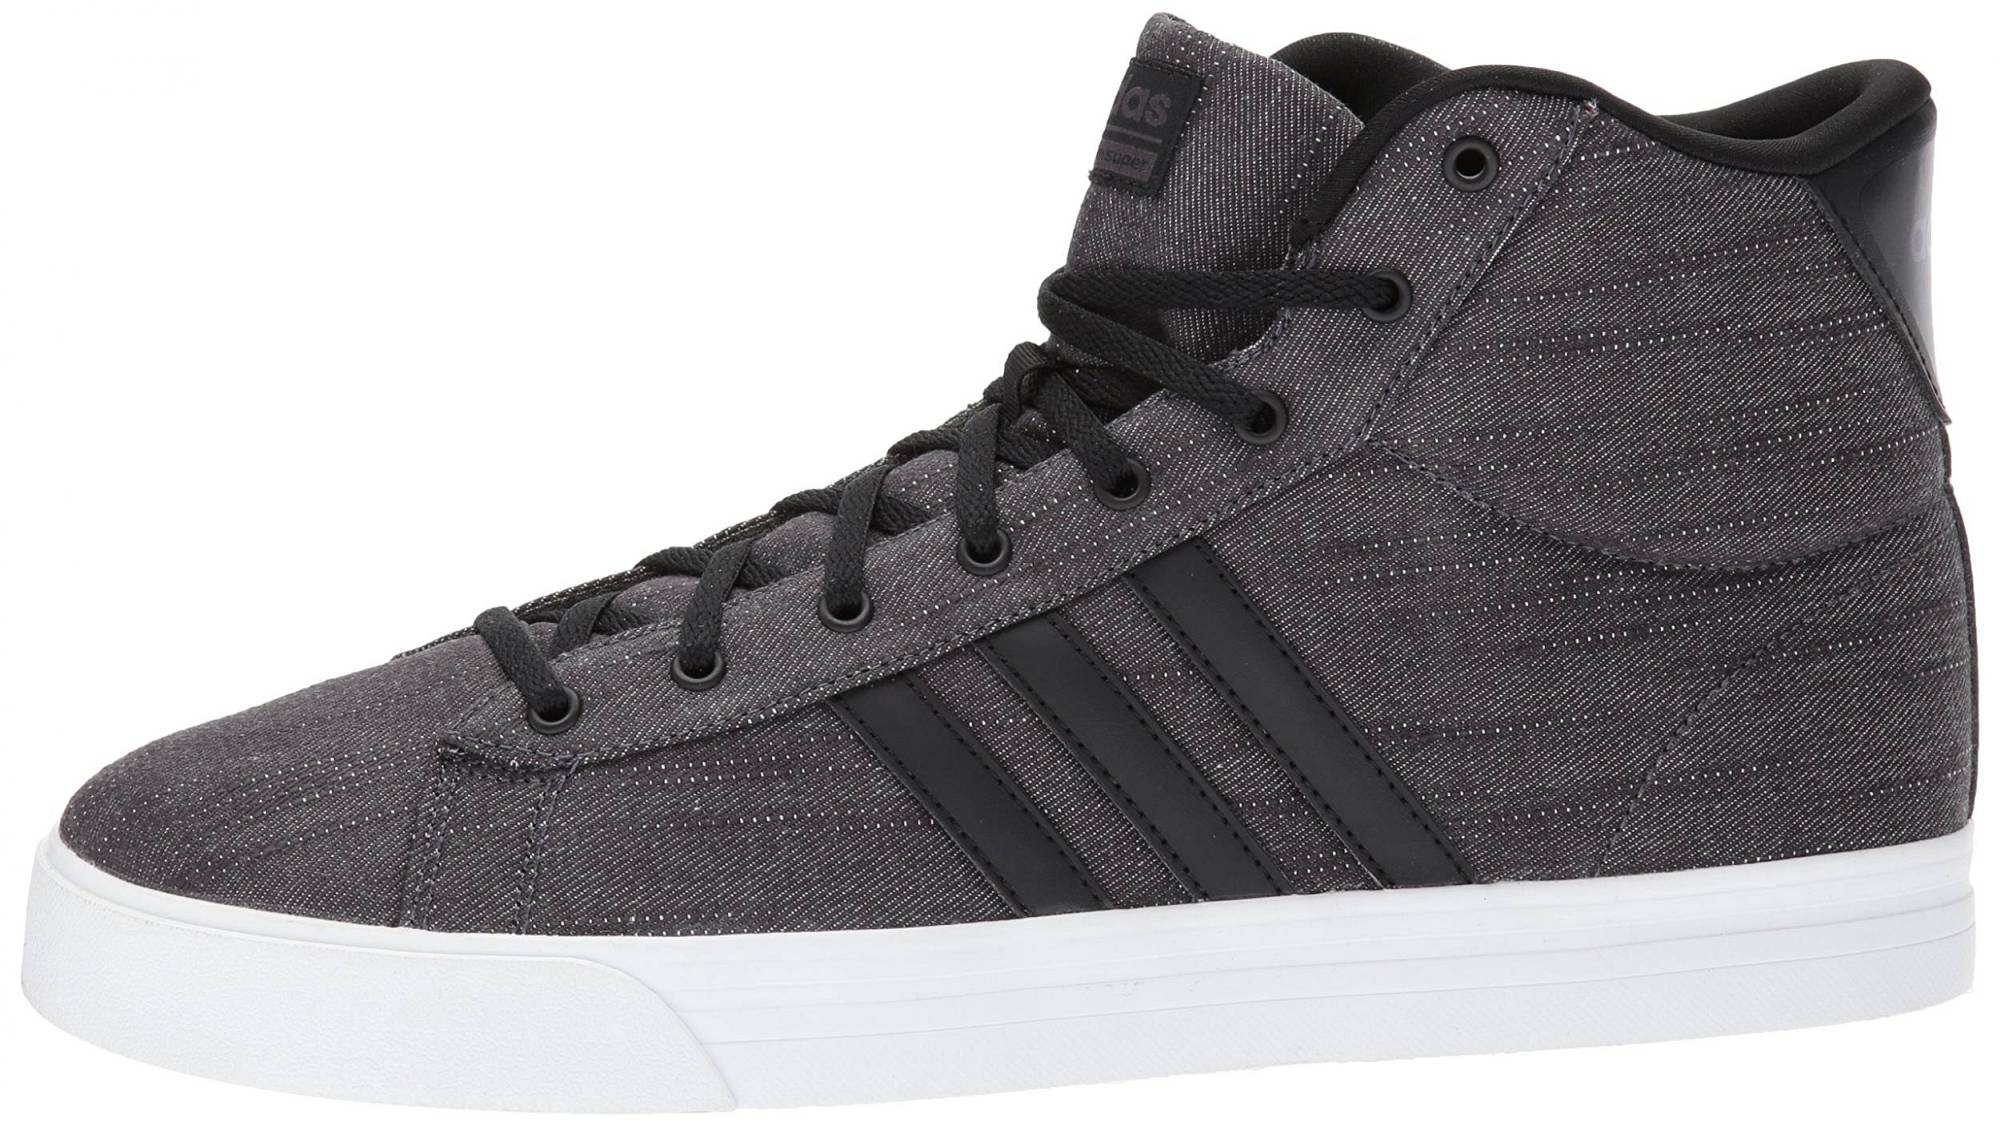 Adidas Cloudfoam Super Daily Mid – Shoes Reviews & Reasons To Buy